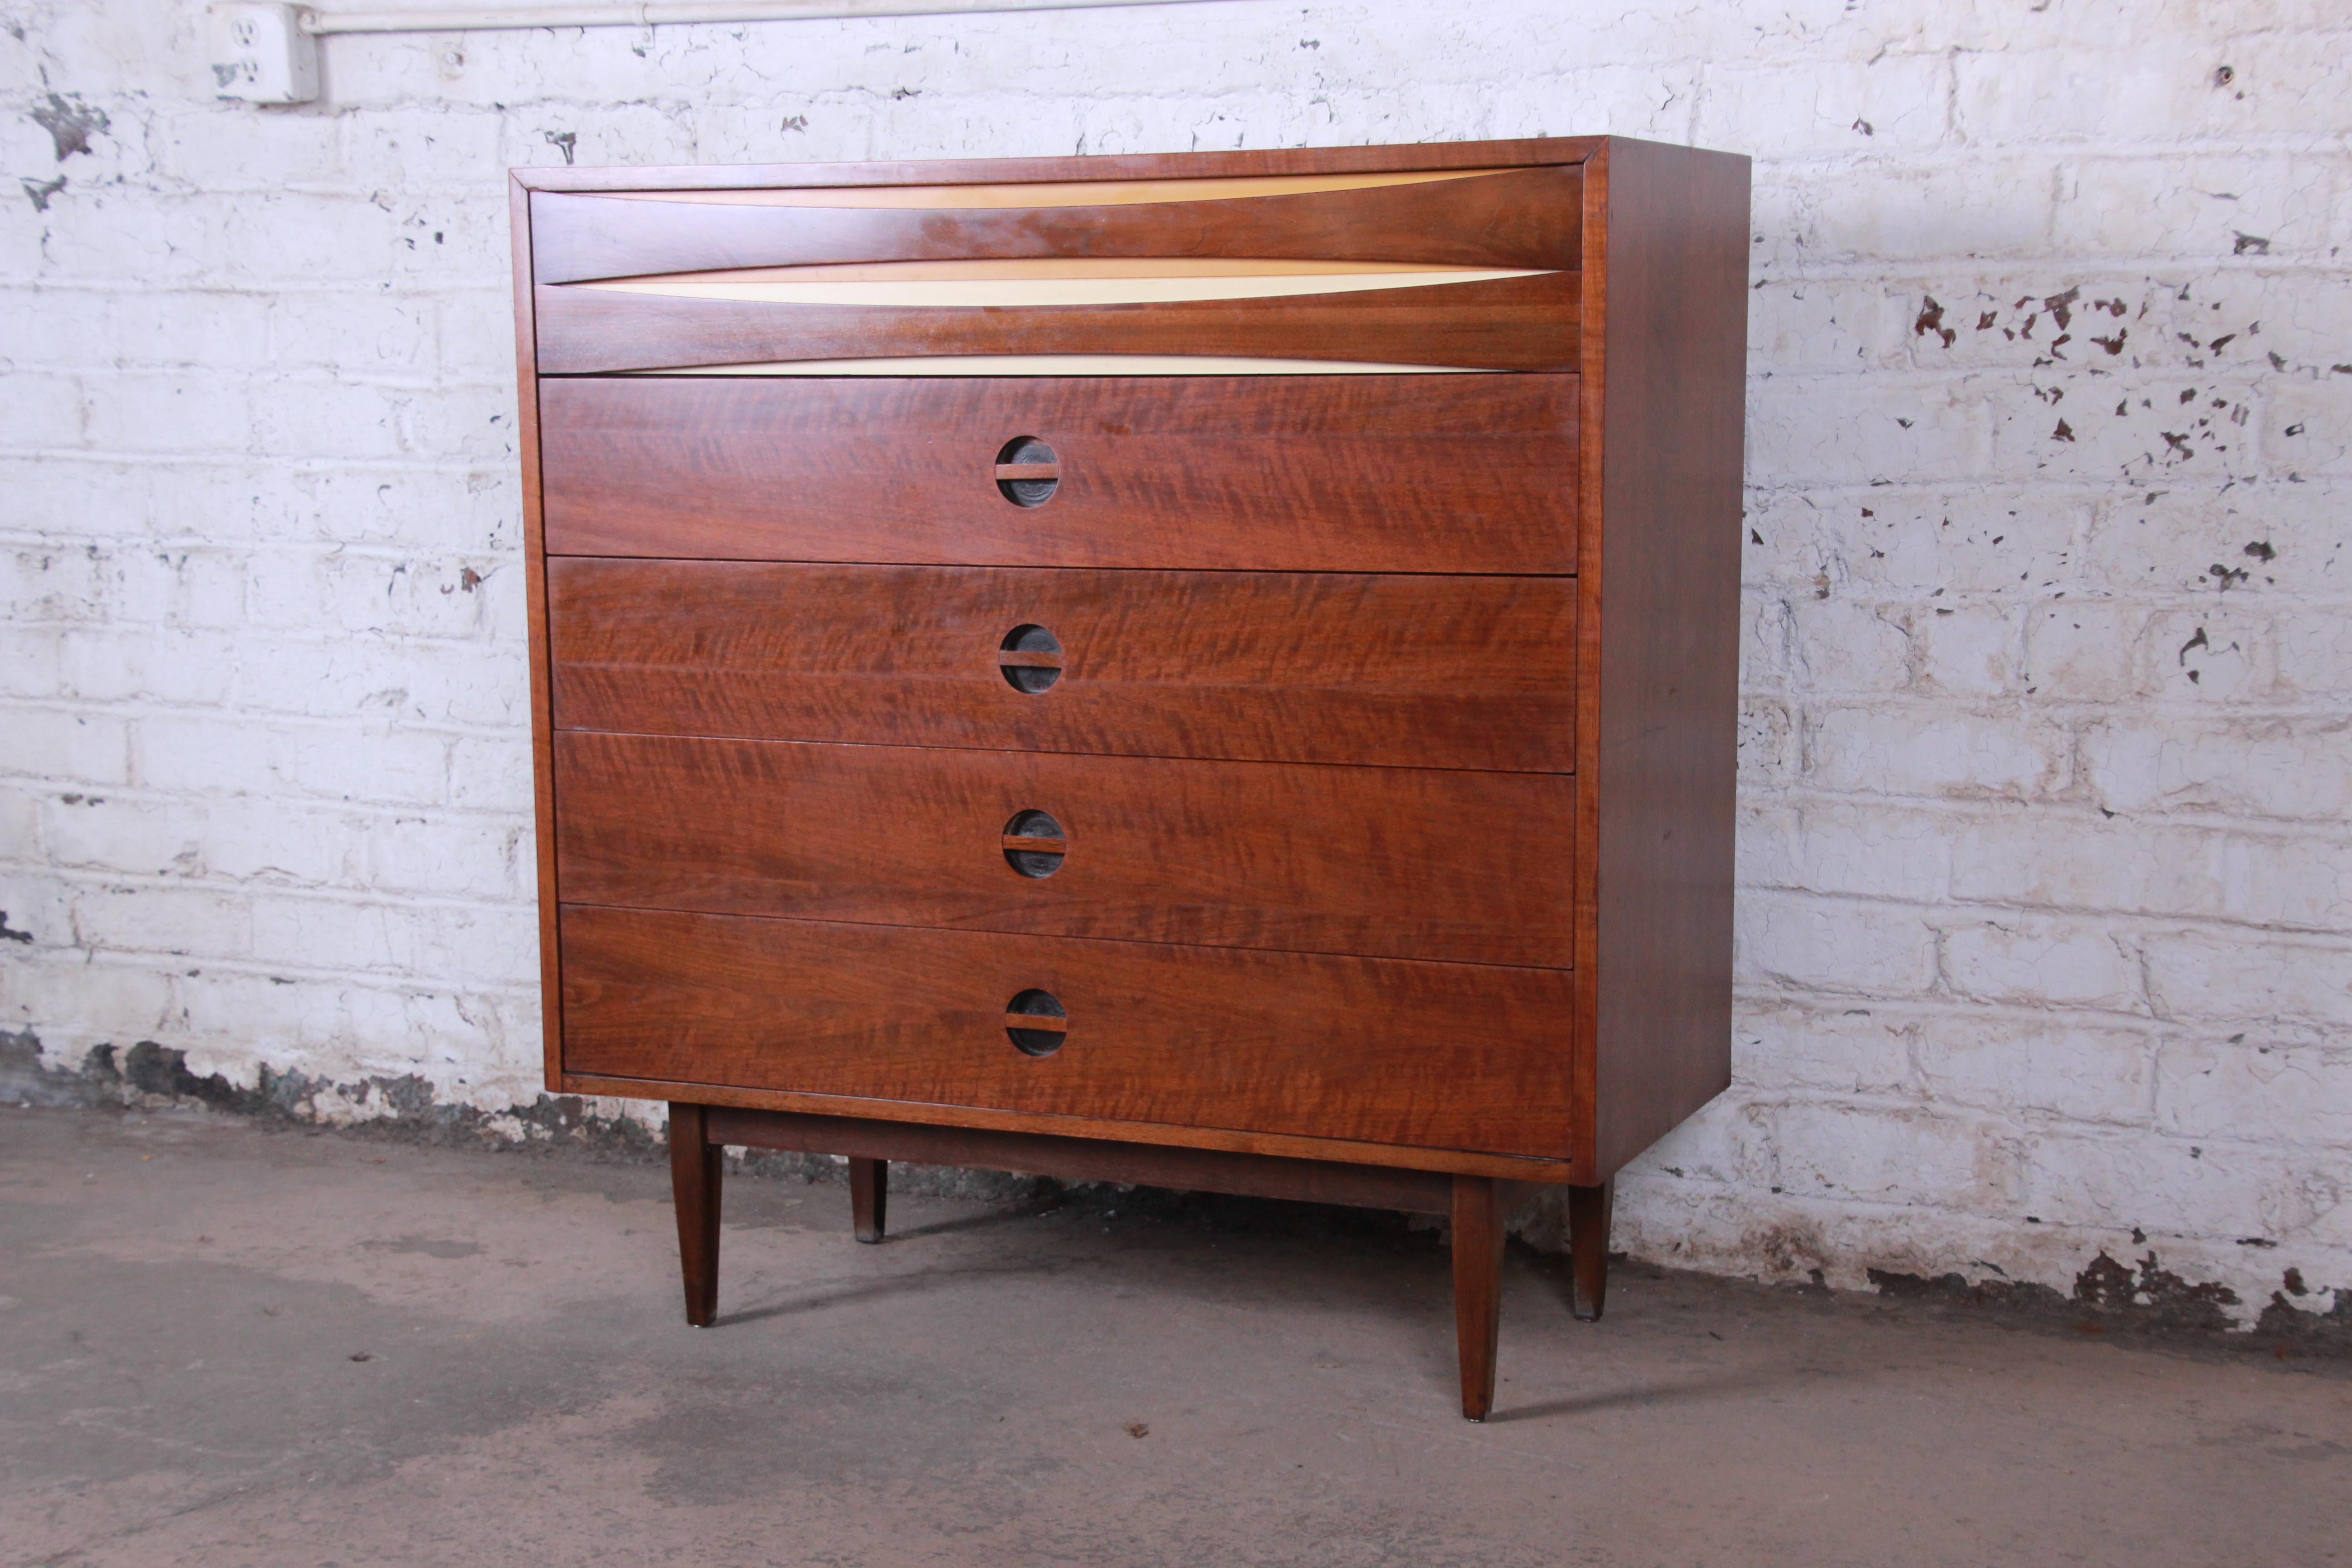 A gorgeous Mid-Century Modern walnut highboy dresser in the style of Arne Vodder. The dresser features beautiful walnut wood grain and a unique bowtie design on the top drawer front. It offers ample room for storage, with five deep dovetailed